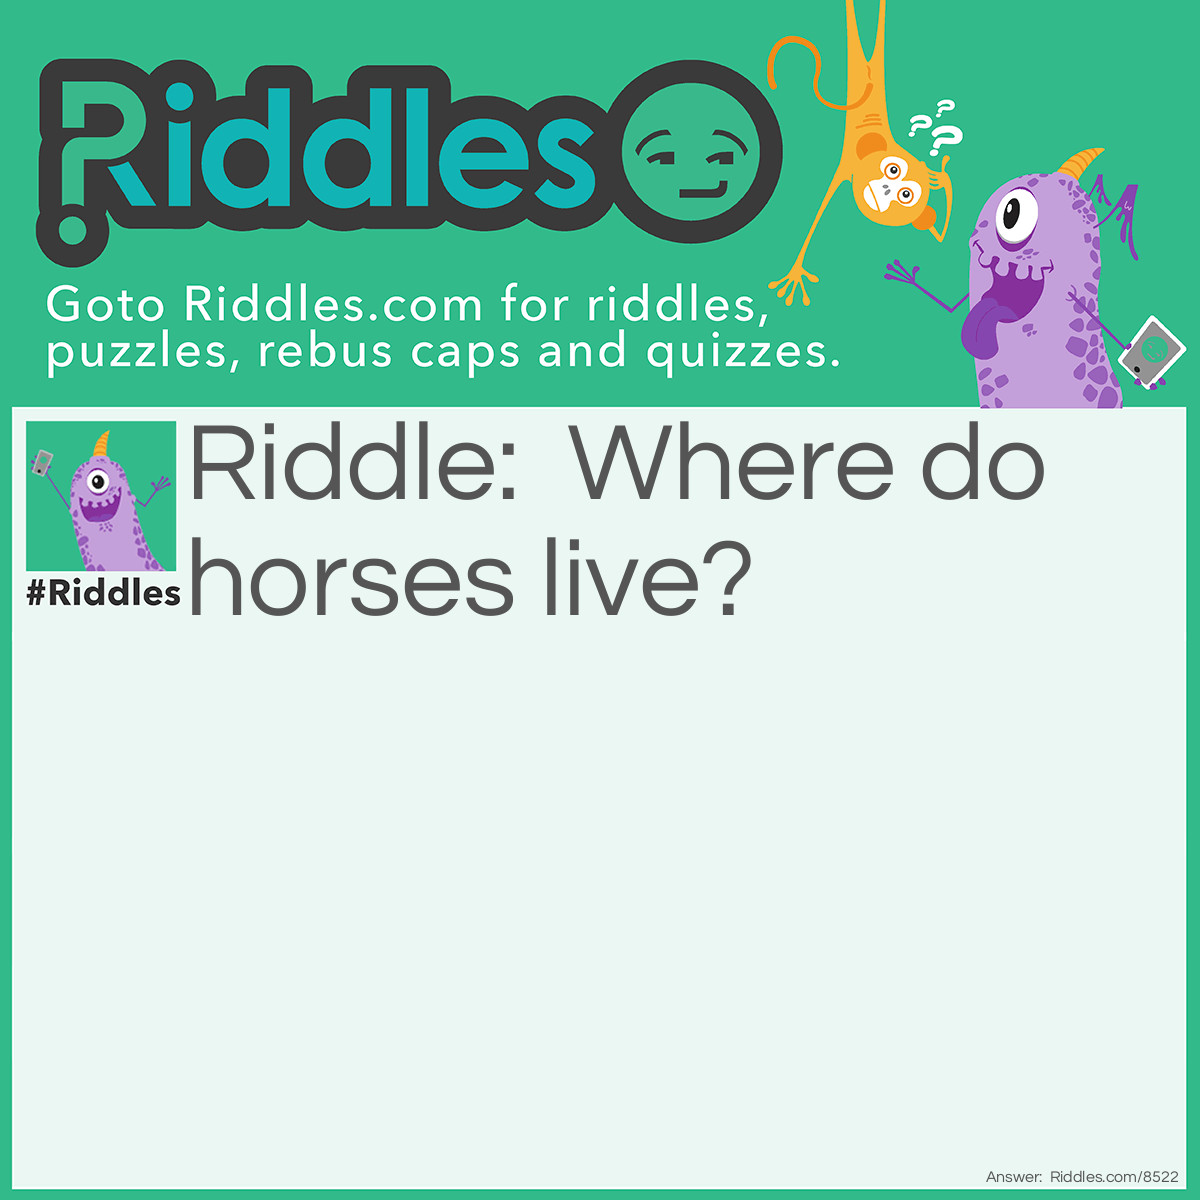 Riddle: Where do horses live? Answer: In a NEIGHborhood.